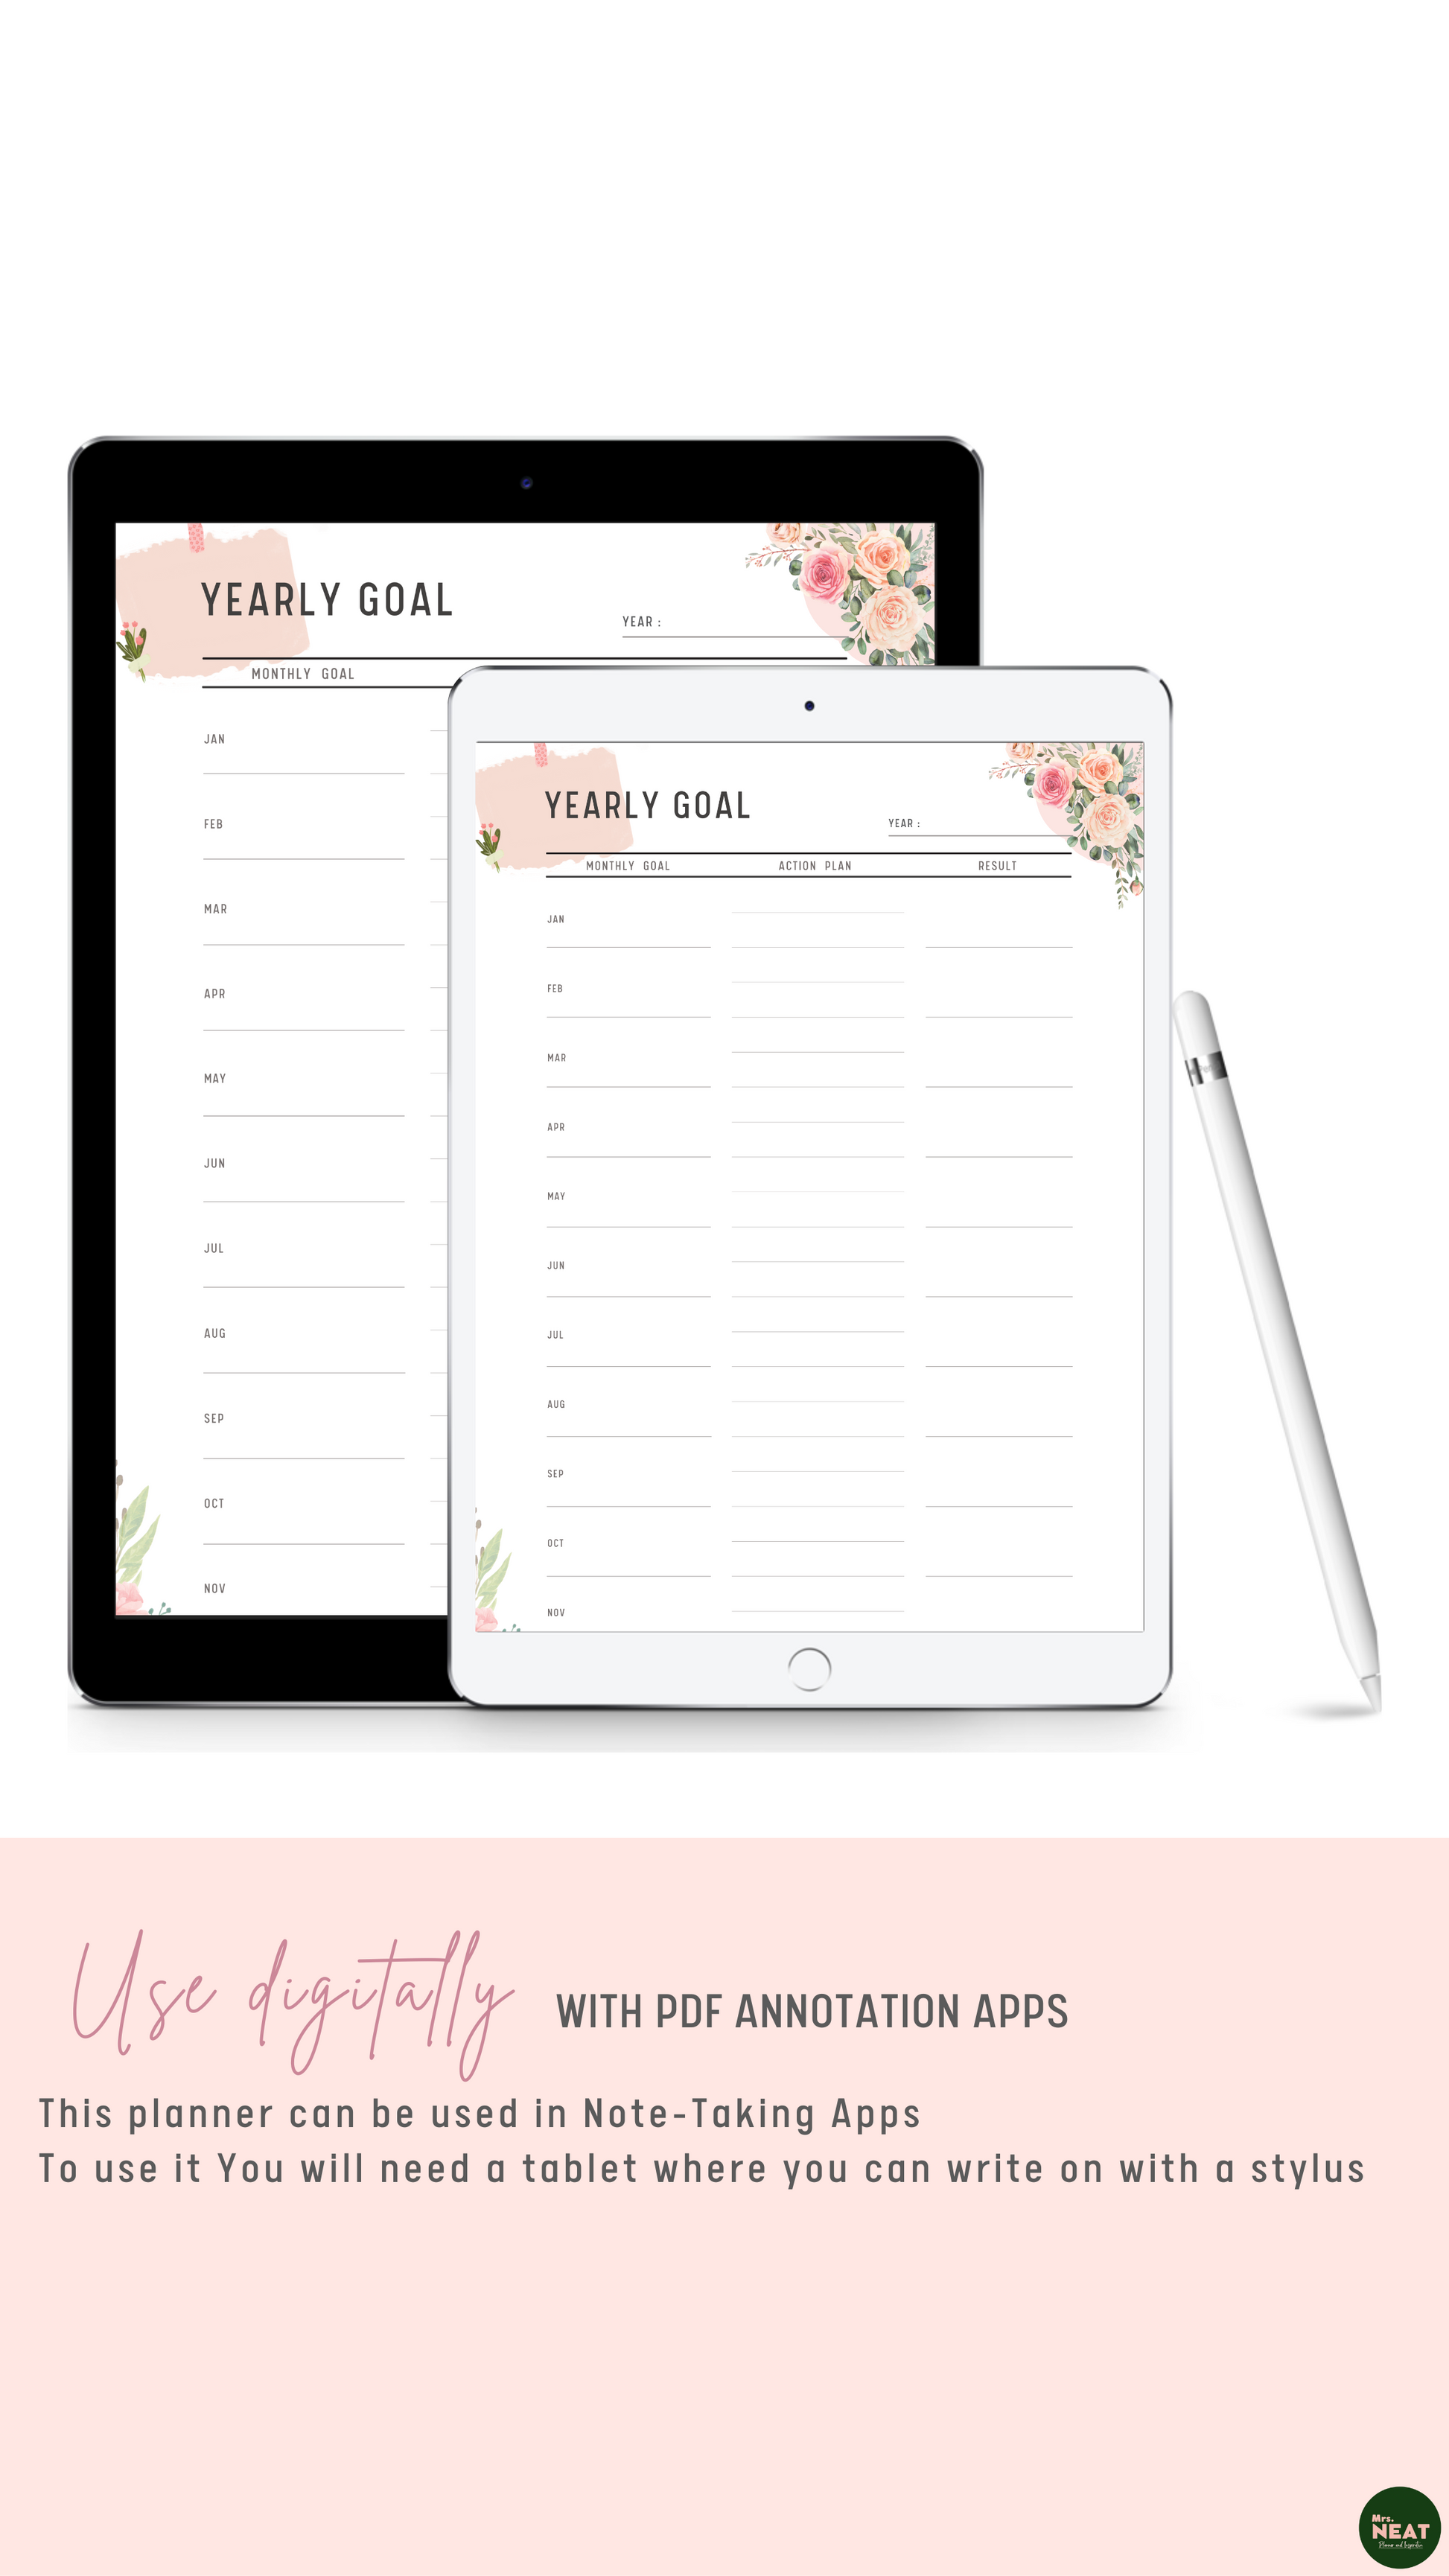 Floral Yearly Goal Planner use digitally with Tablet and Stylus